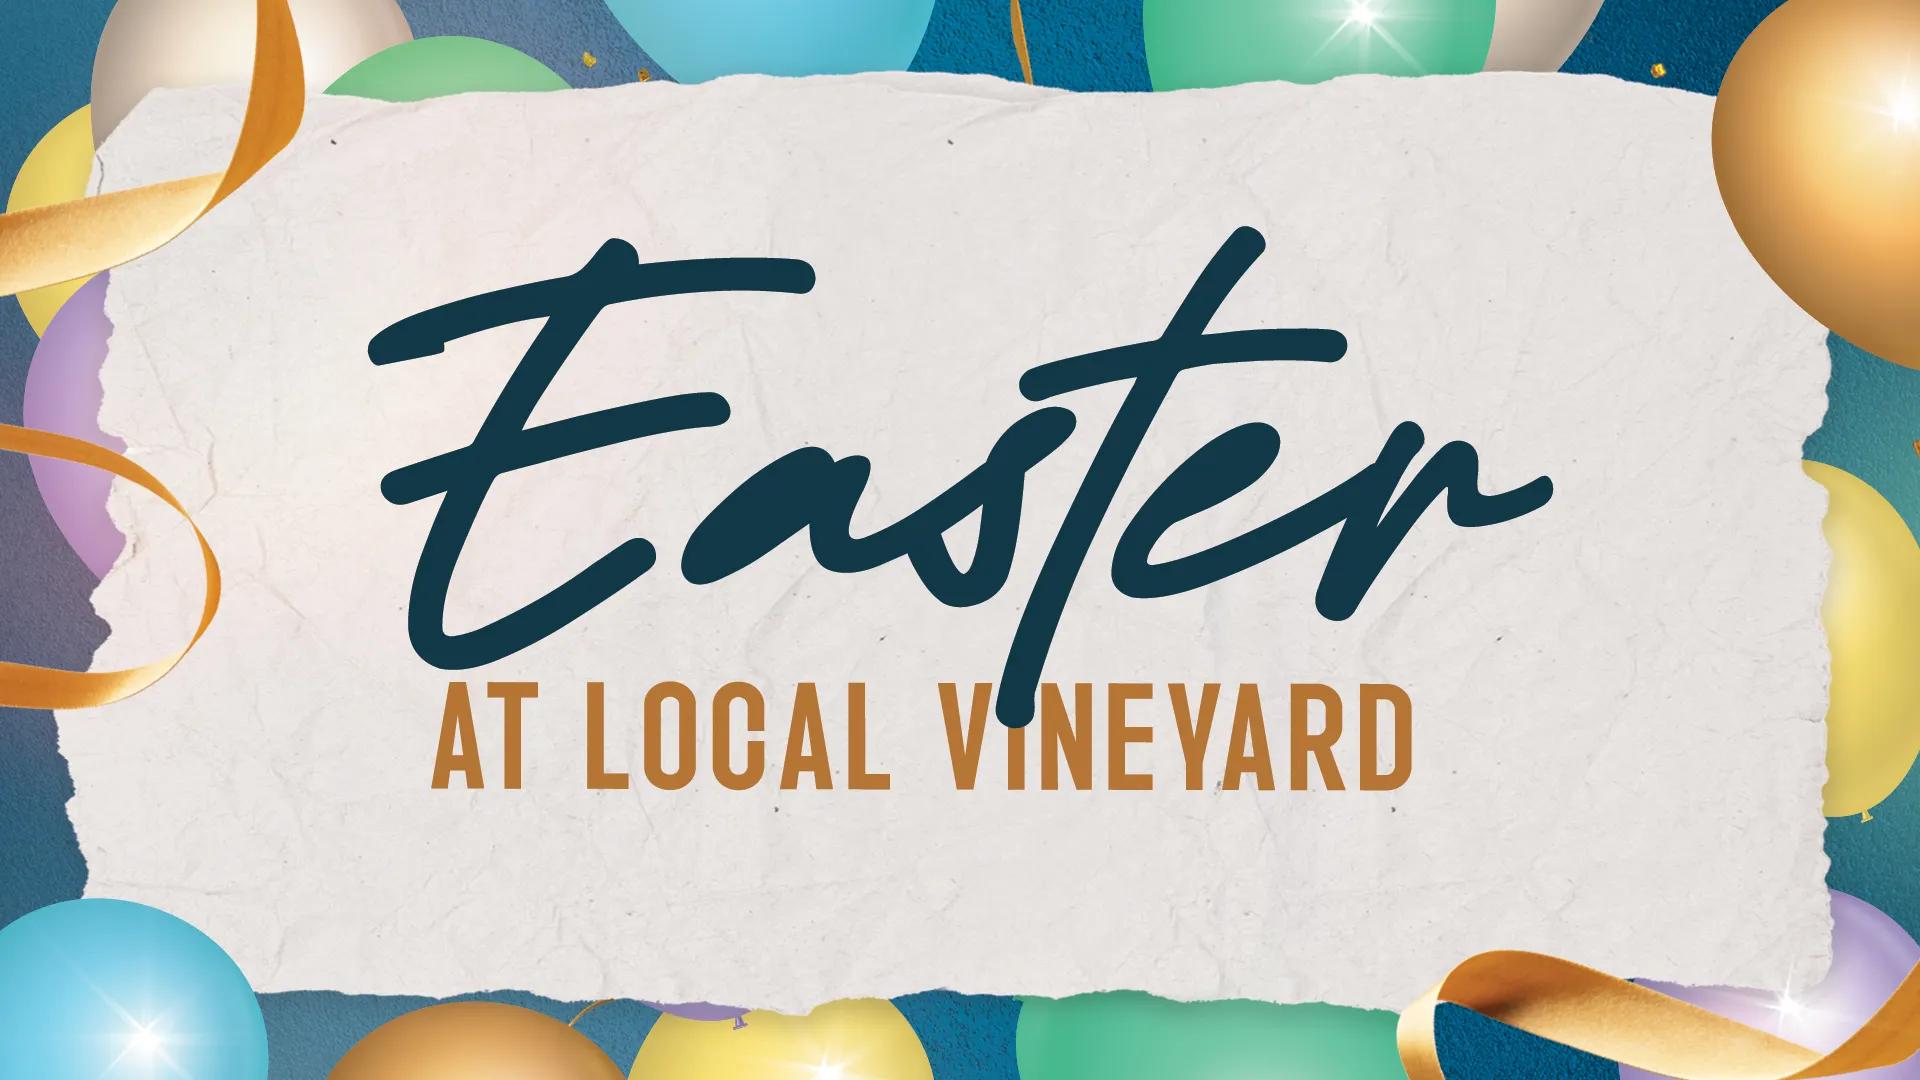 An image promoting the start of the Local Vineyard's Easter series